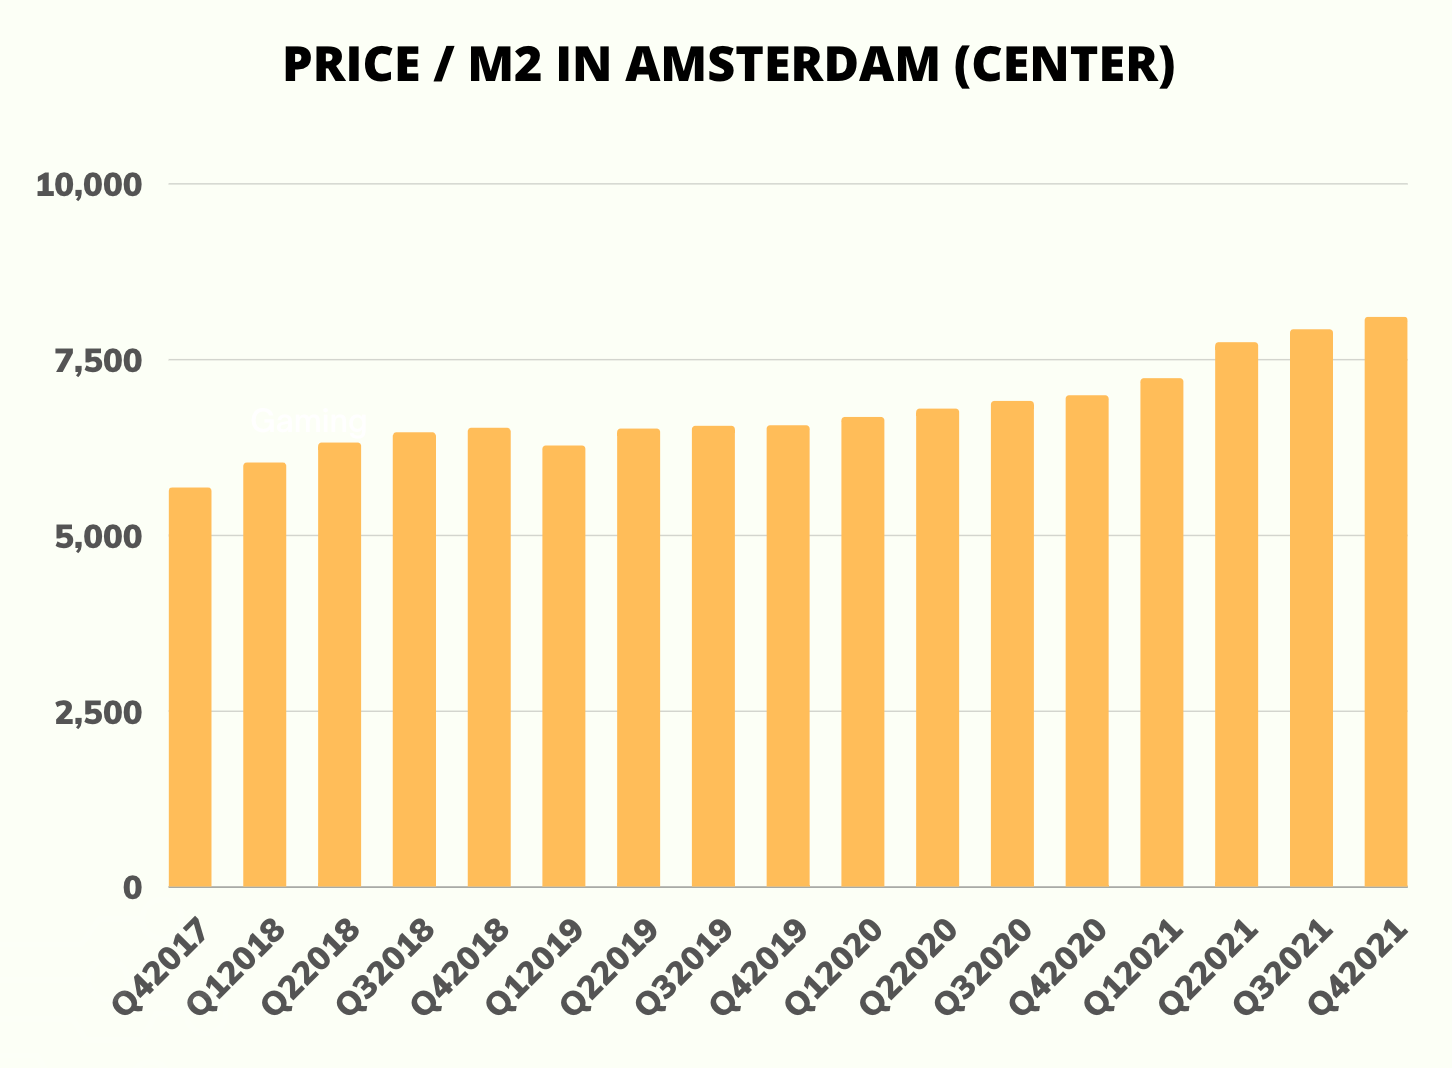 Graph of housing price per square meter m2 in Amsterdam inside the ring road between 2017 and 2021